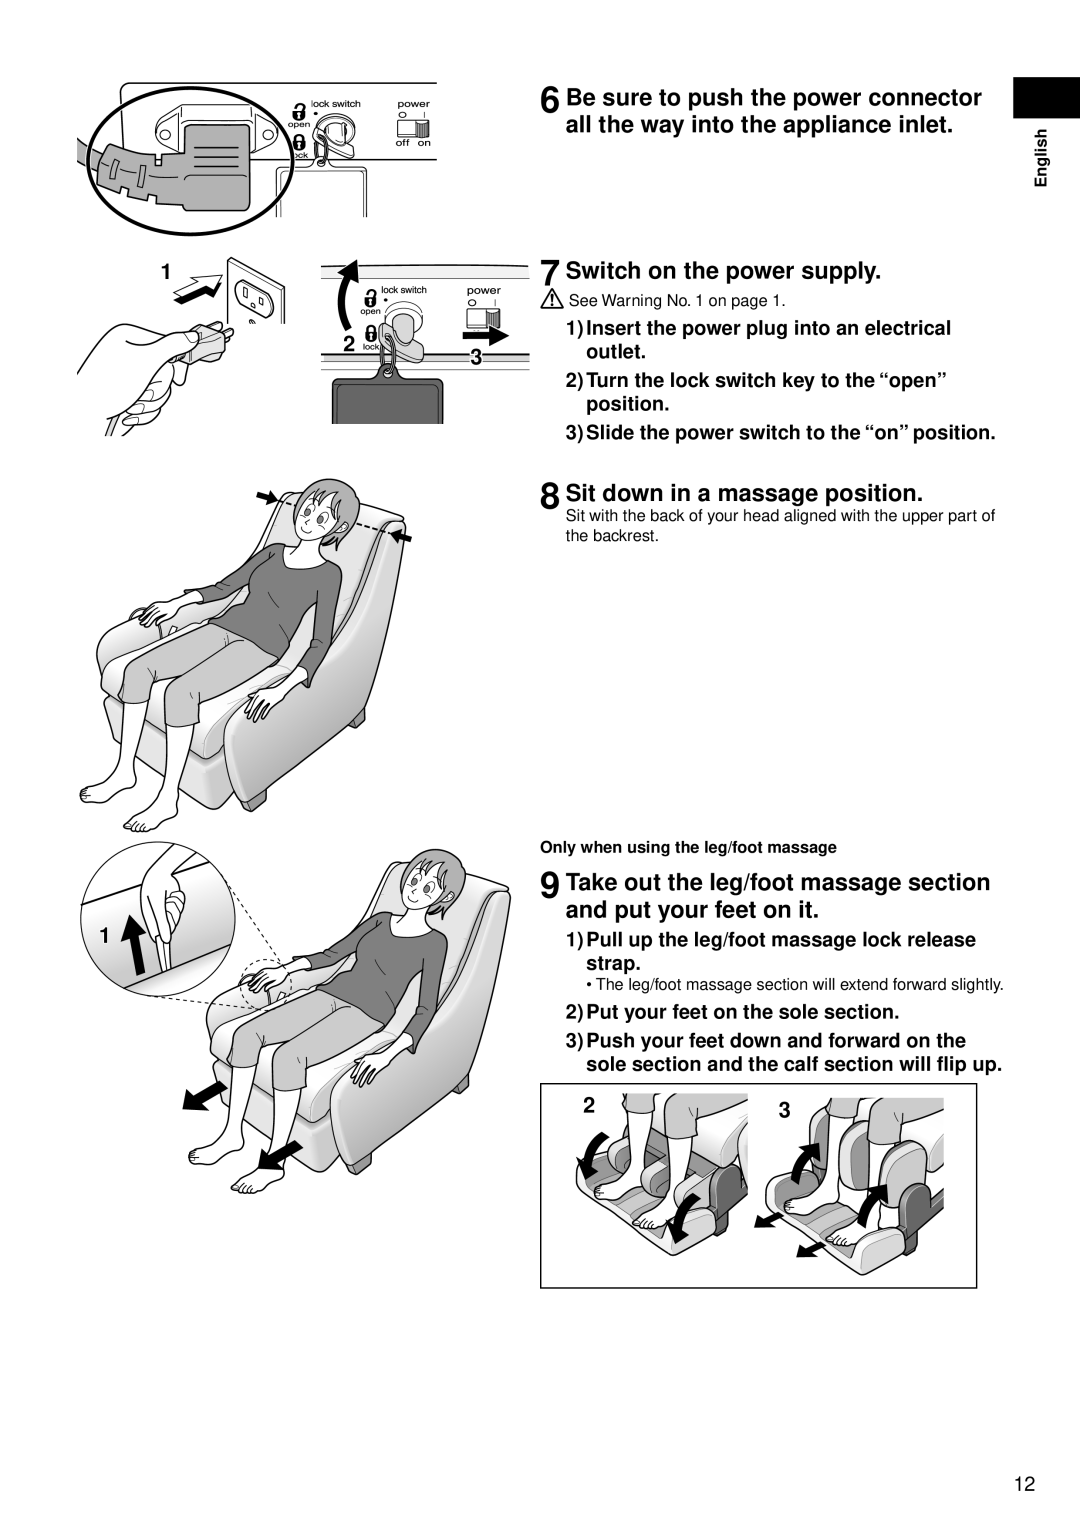 Panasonic EP-MS40 manual Switch on the power supply, Sit down in a massage position, Take out the leg/foot massage section 